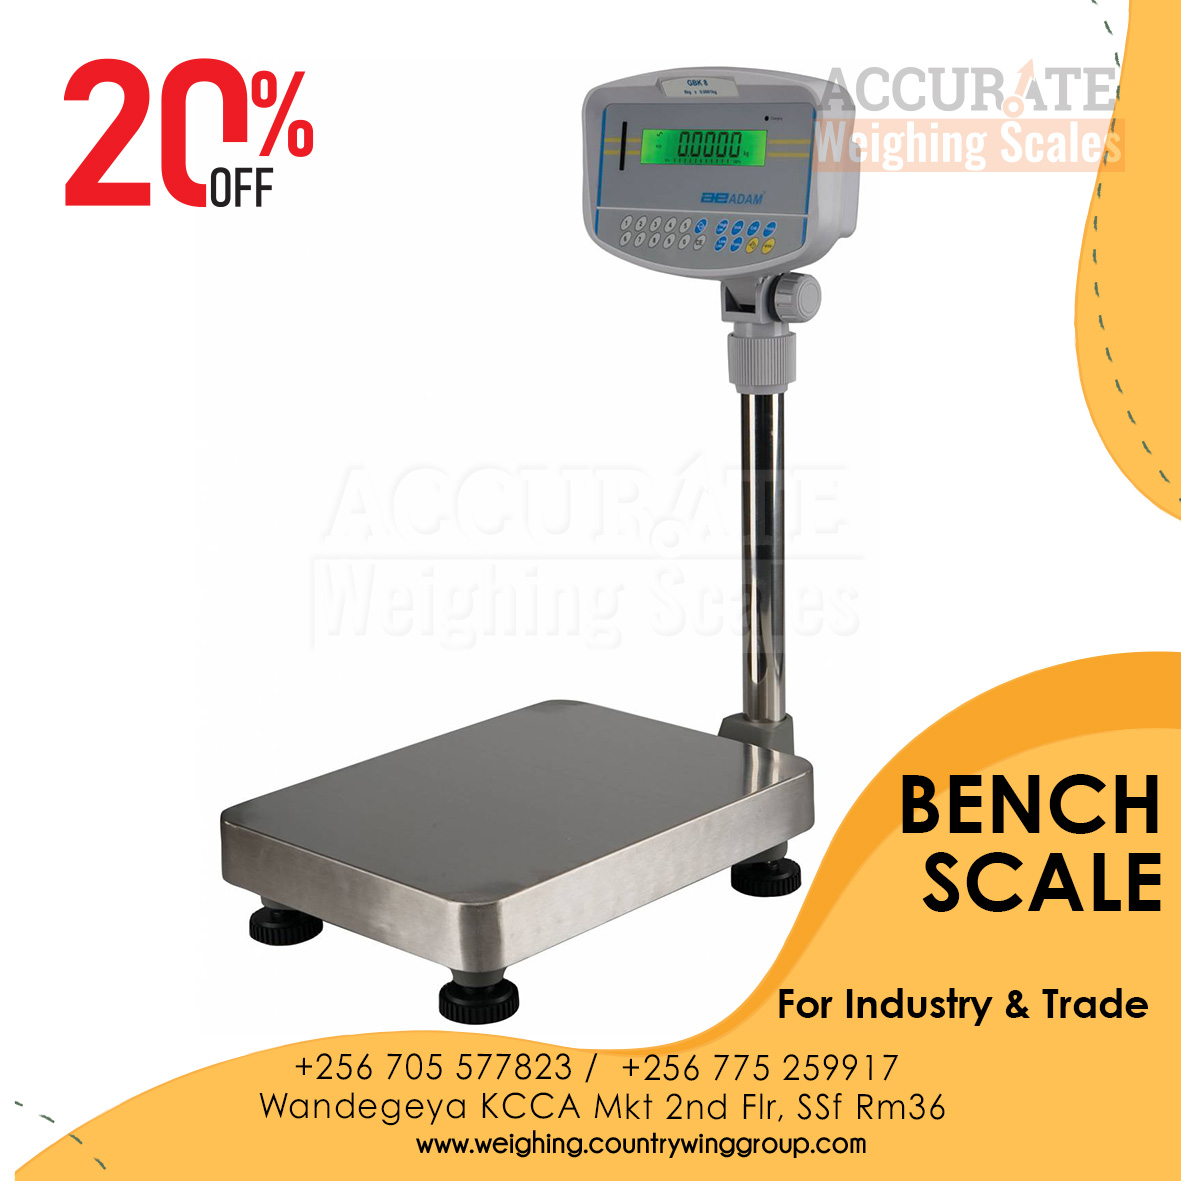 Electronic Bench weighing scales supplier in Uganda'